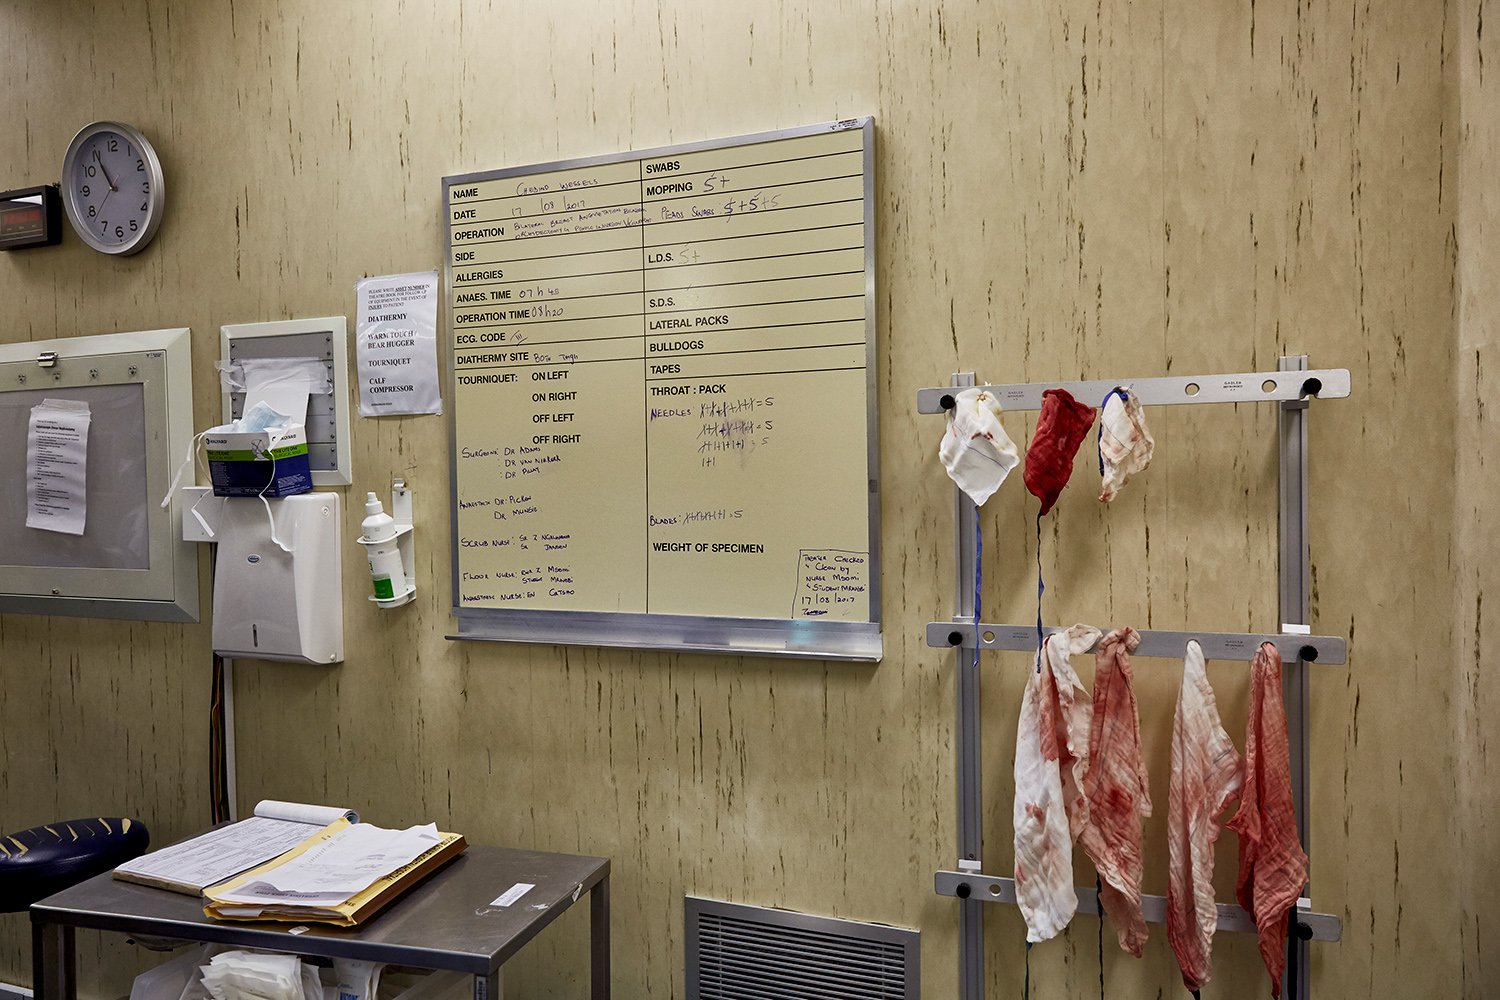  The surgical information board lists the procedures that were carried out on Chedino during her gender-affirming surgery, Groote Schuur Hospital, Cape Town, 2017.   The bloody bandages were hung up and counted to make sure none are left inside the p